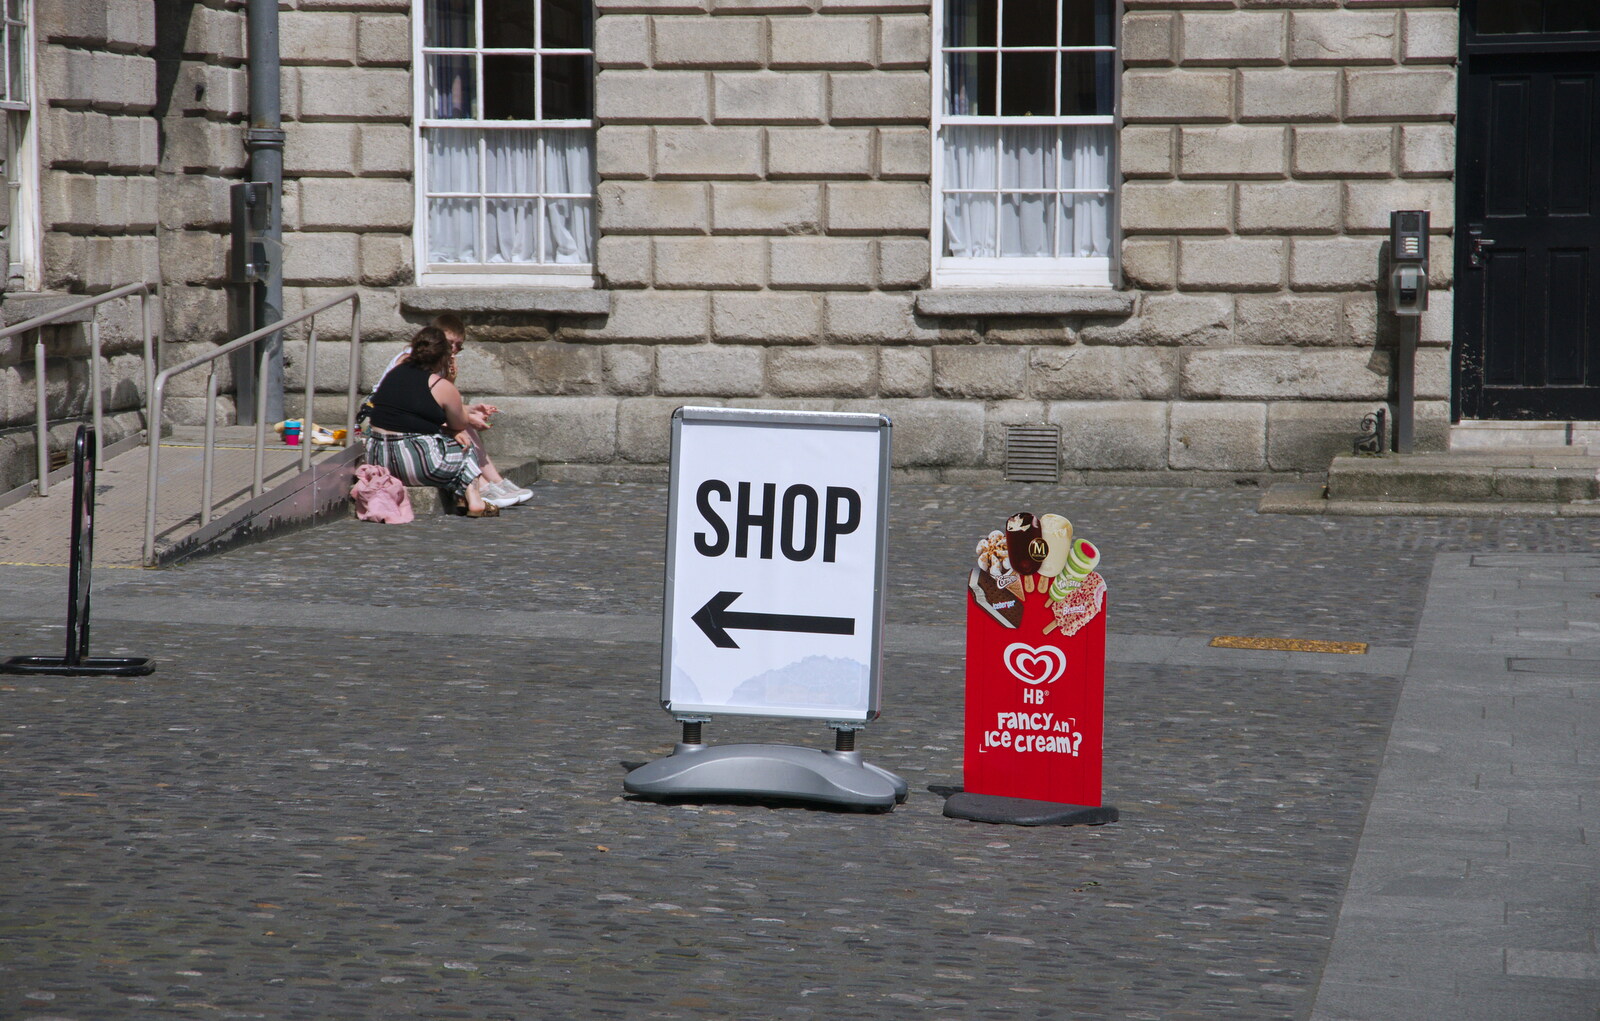 An ever-so-inviting sign for a, er, shop from Busking in Temple Bar, Dublin, Ireland - 12th August 2019